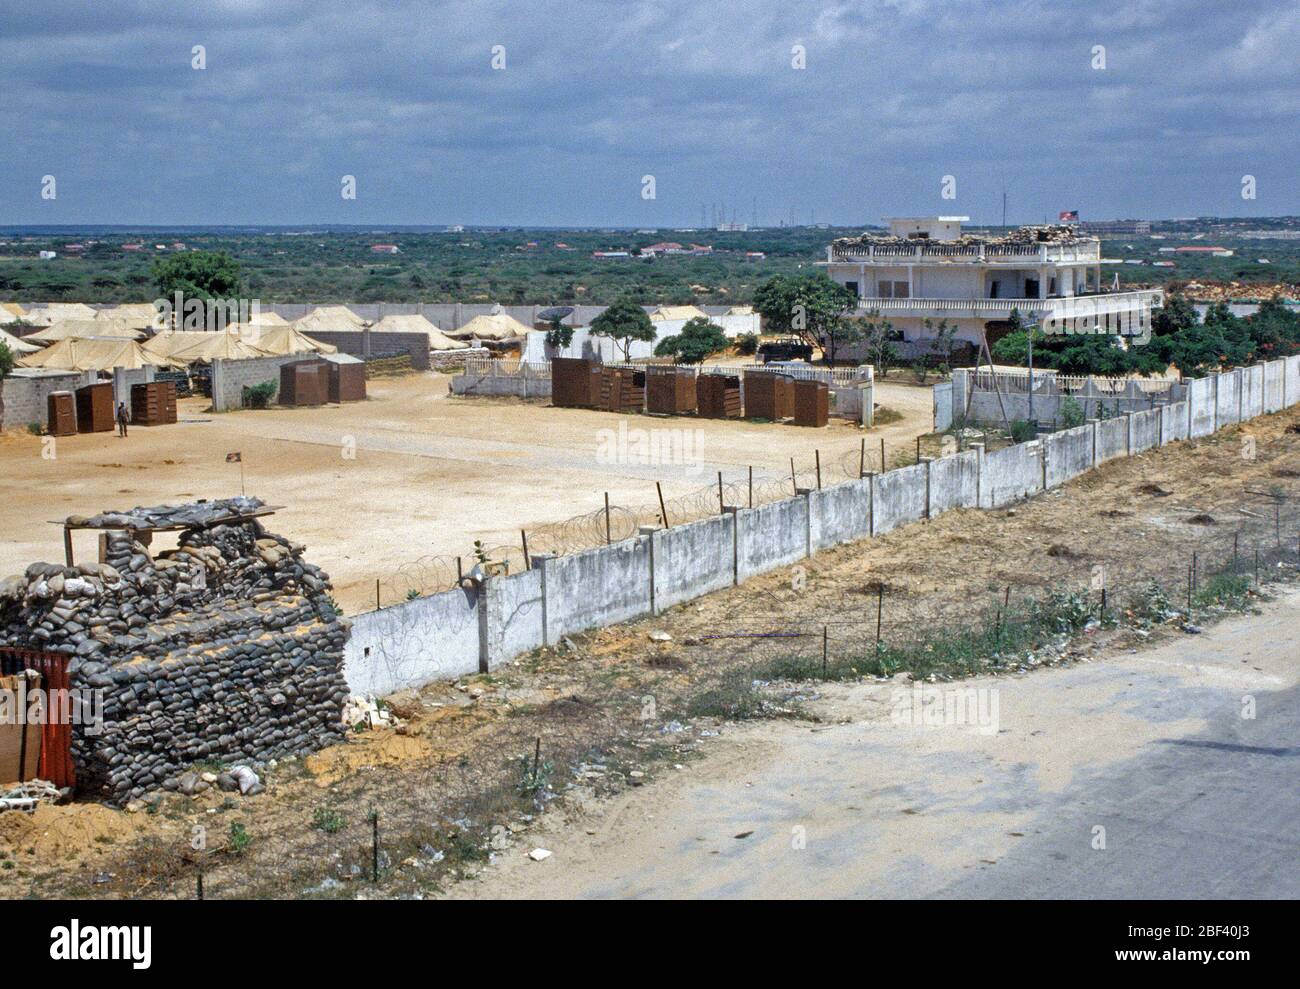 MOGADISHU, SOMALIA... 30 Oct 1993... Operation Continue Hope.  A view of Hunter Base, home for the 561st Signal Battalion, 40th Transportation Company and 196th Quartermaster Company.  Sandbags have been placed on top of a CONEX to reinforce a break in the wall. Stock Photo